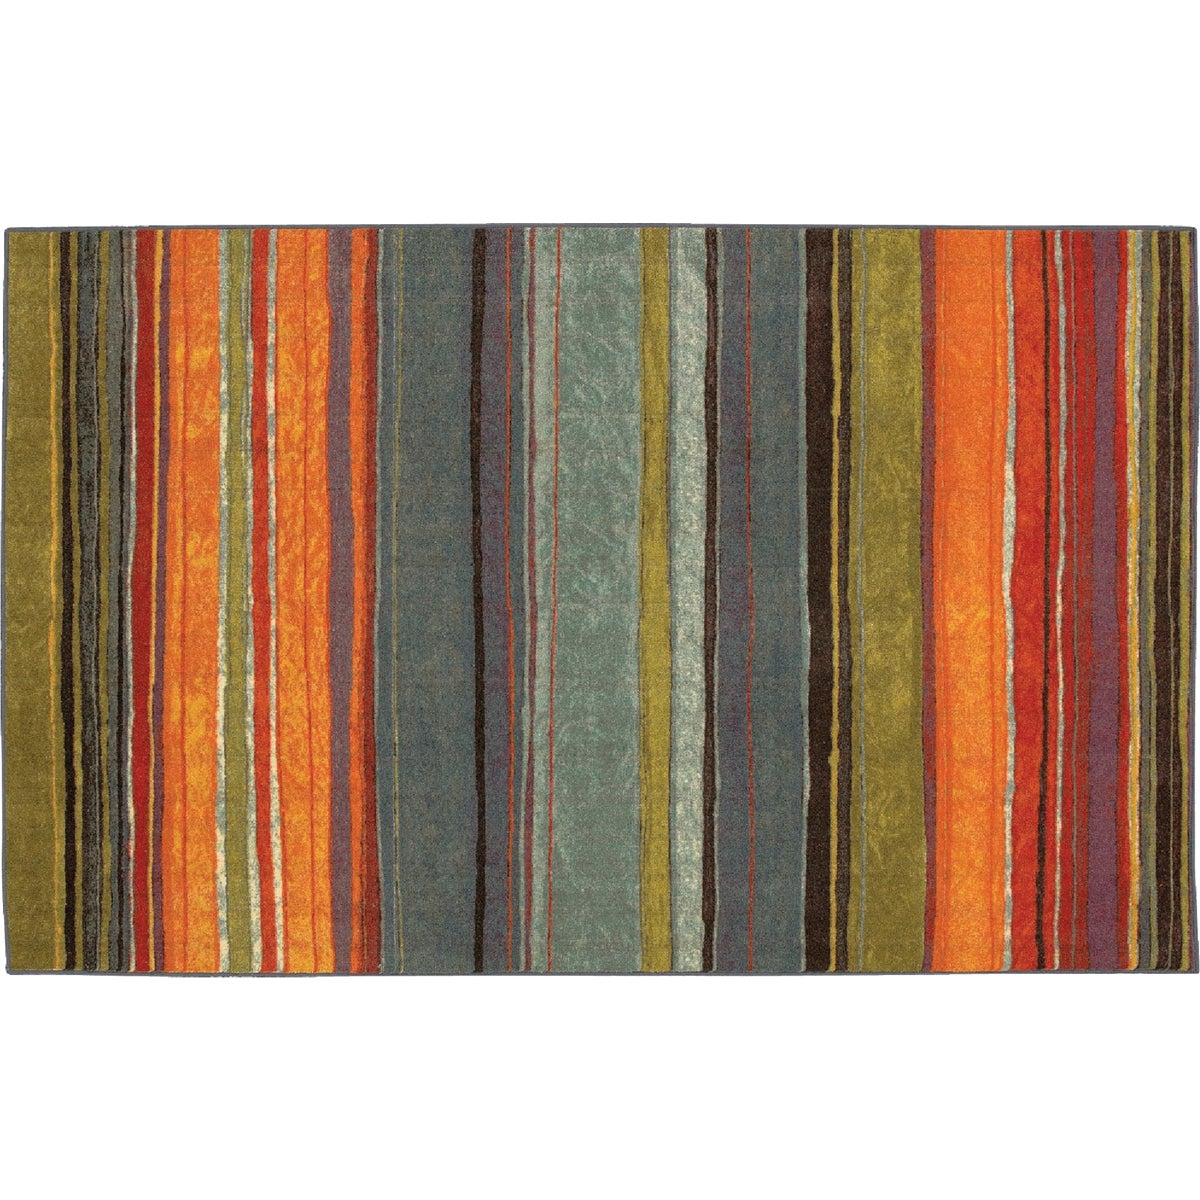 Mohawk Home Rainbow Multi-Color 1 Ft. 8 In. x 2 Ft. 10 In. Accent Rug